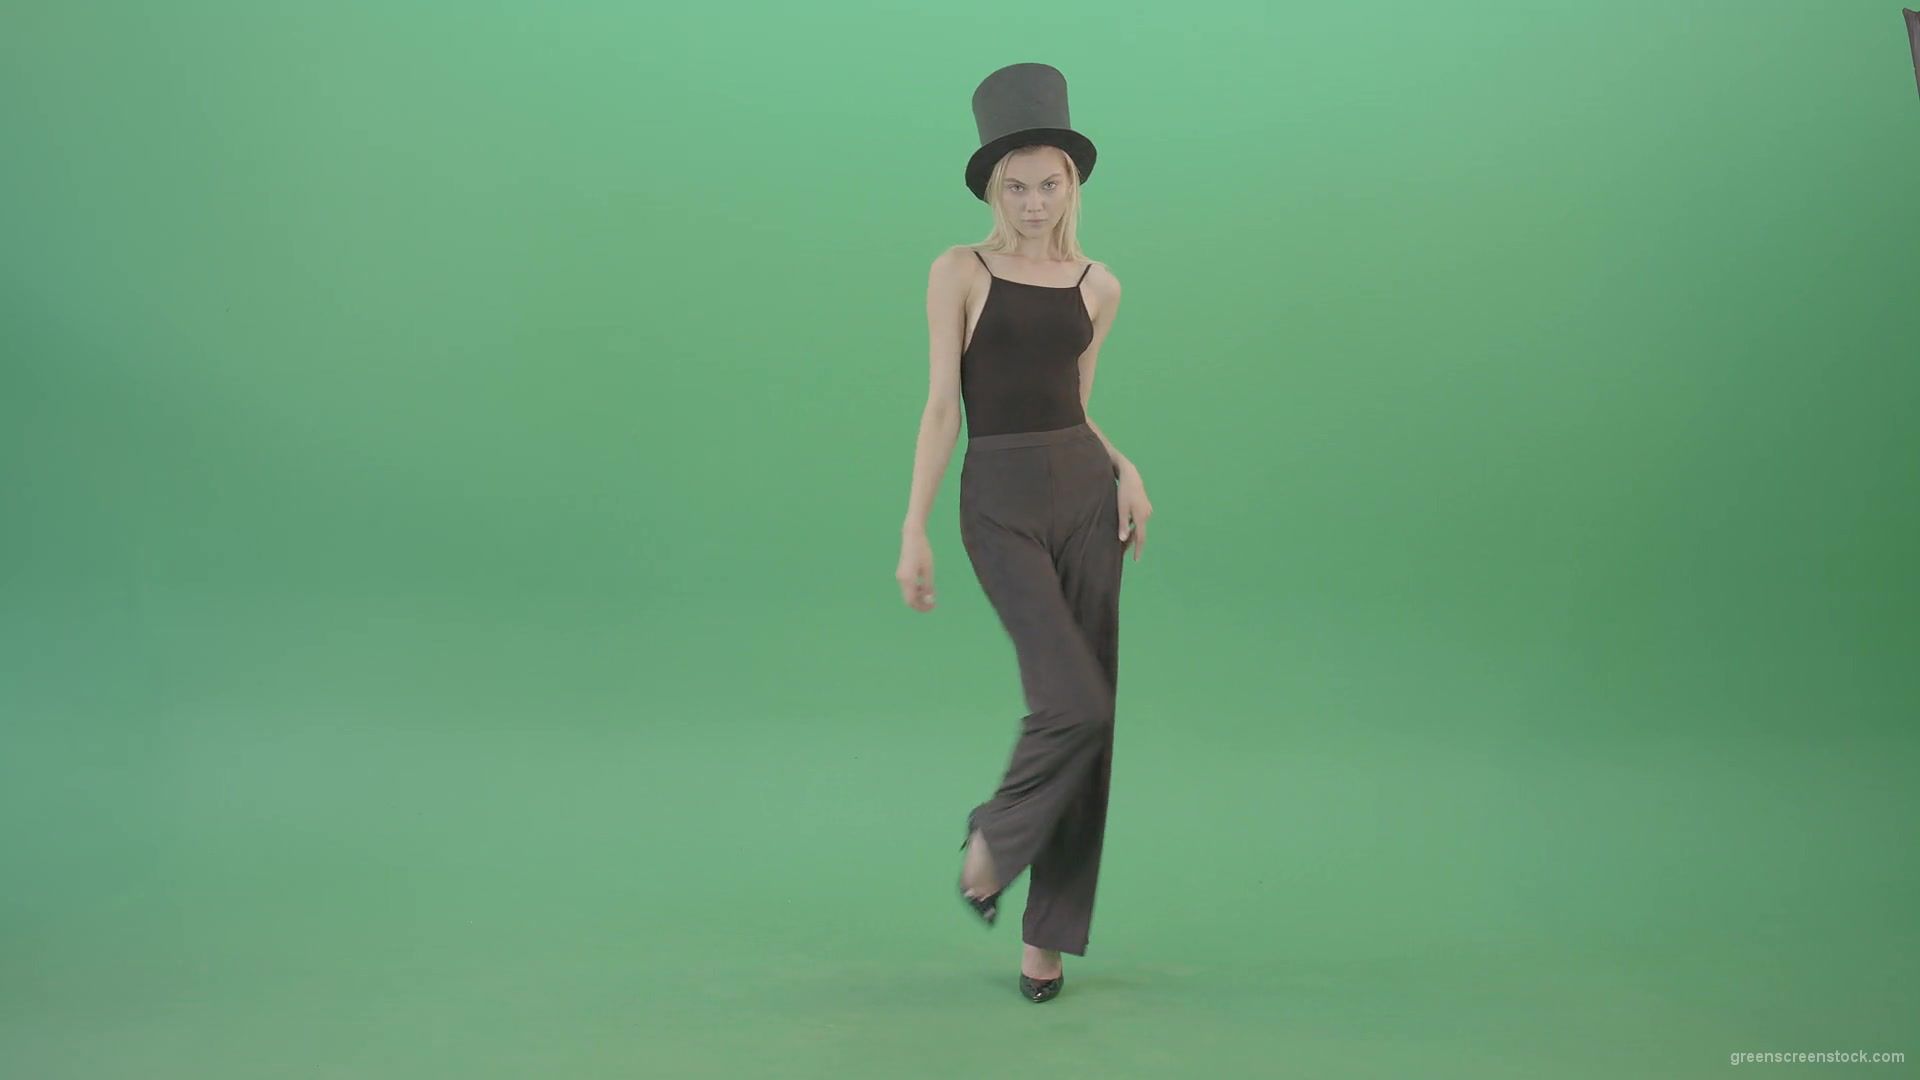 Magic-elegant-dancing-girl-slowly-moving-on-green-background-4K-Video-Footage-1920_002 Green Screen Stock